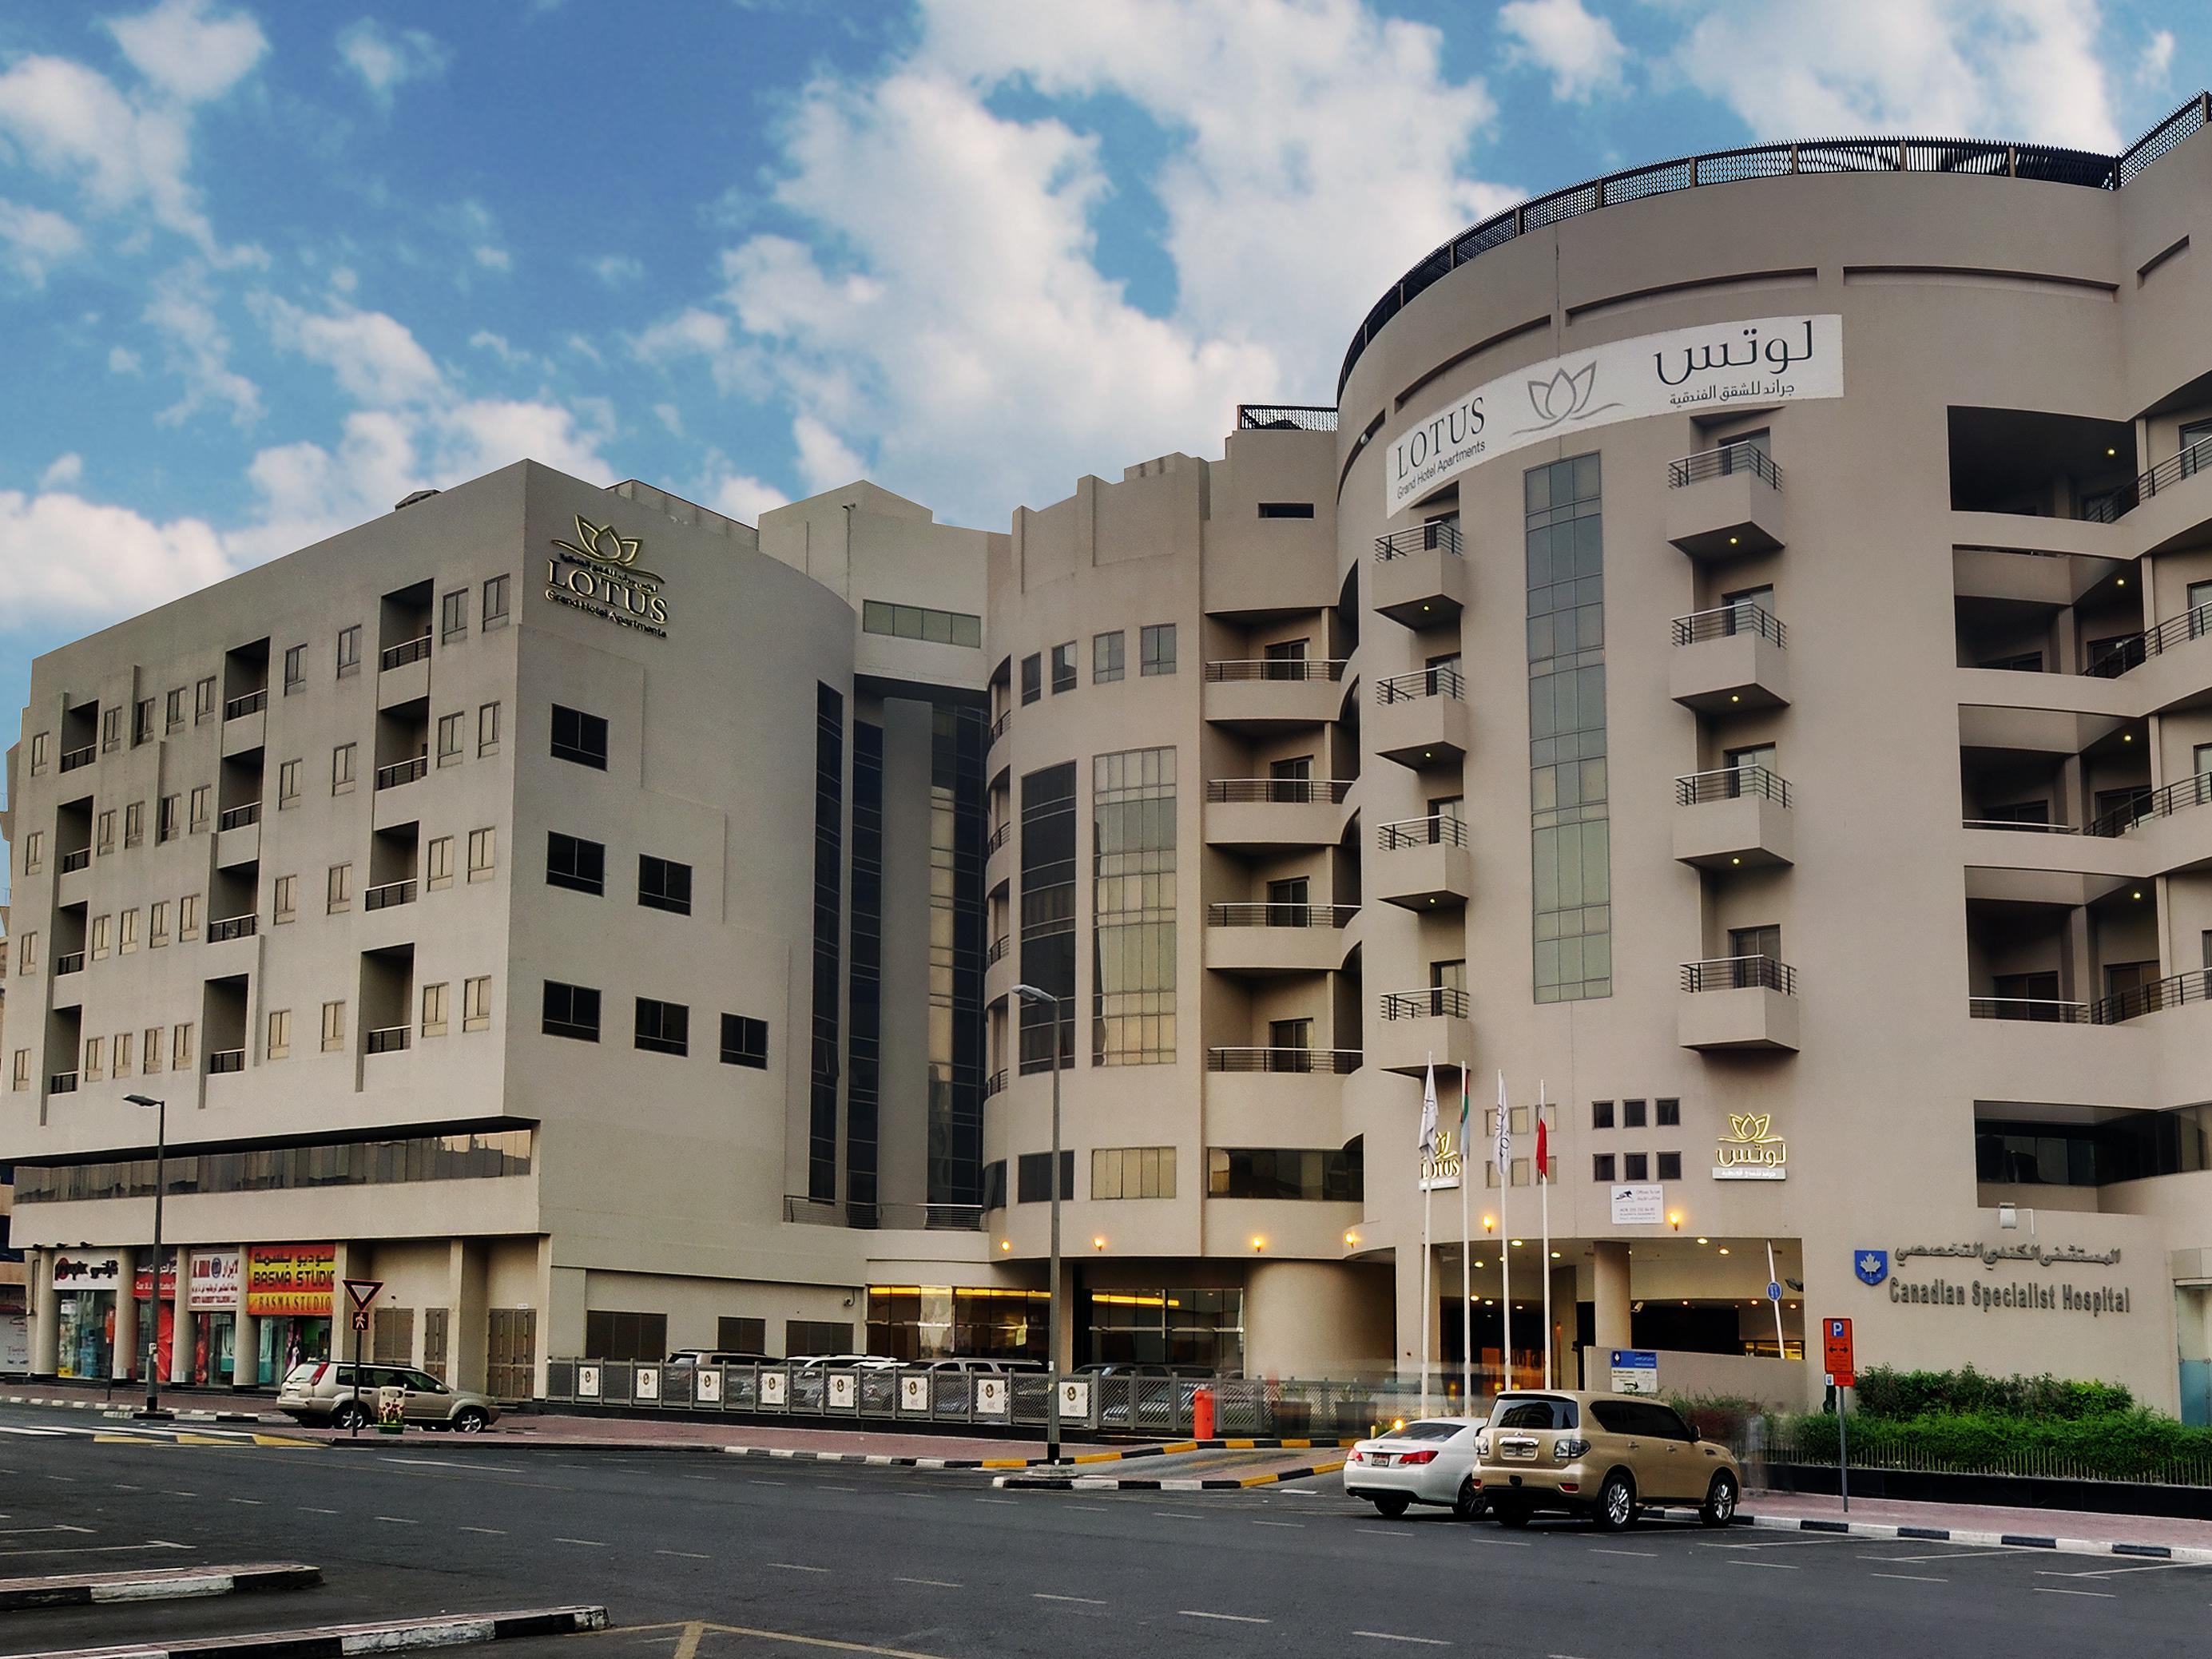 Lotus Grand Hotel Apartments Emirate of Dubai FAQ 2016, What facilities are there in Lotus Grand Hotel Apartments Emirate of Dubai 2016, What Languages Spoken are Supported in Lotus Grand Hotel Apartments Emirate of Dubai 2016, Which payment cards are accepted in Lotus Grand Hotel Apartments Emirate of Dubai , Emirate of Dubai Lotus Grand Hotel Apartments room facilities and services Q&A 2016, Emirate of Dubai Lotus Grand Hotel Apartments online booking services 2016, Emirate of Dubai Lotus Grand Hotel Apartments address 2016, Emirate of Dubai Lotus Grand Hotel Apartments telephone number 2016,Emirate of Dubai Lotus Grand Hotel Apartments map 2016, Emirate of Dubai Lotus Grand Hotel Apartments traffic guide 2016, how to go Emirate of Dubai Lotus Grand Hotel Apartments, Emirate of Dubai Lotus Grand Hotel Apartments booking online 2016, Emirate of Dubai Lotus Grand Hotel Apartments room types 2016.